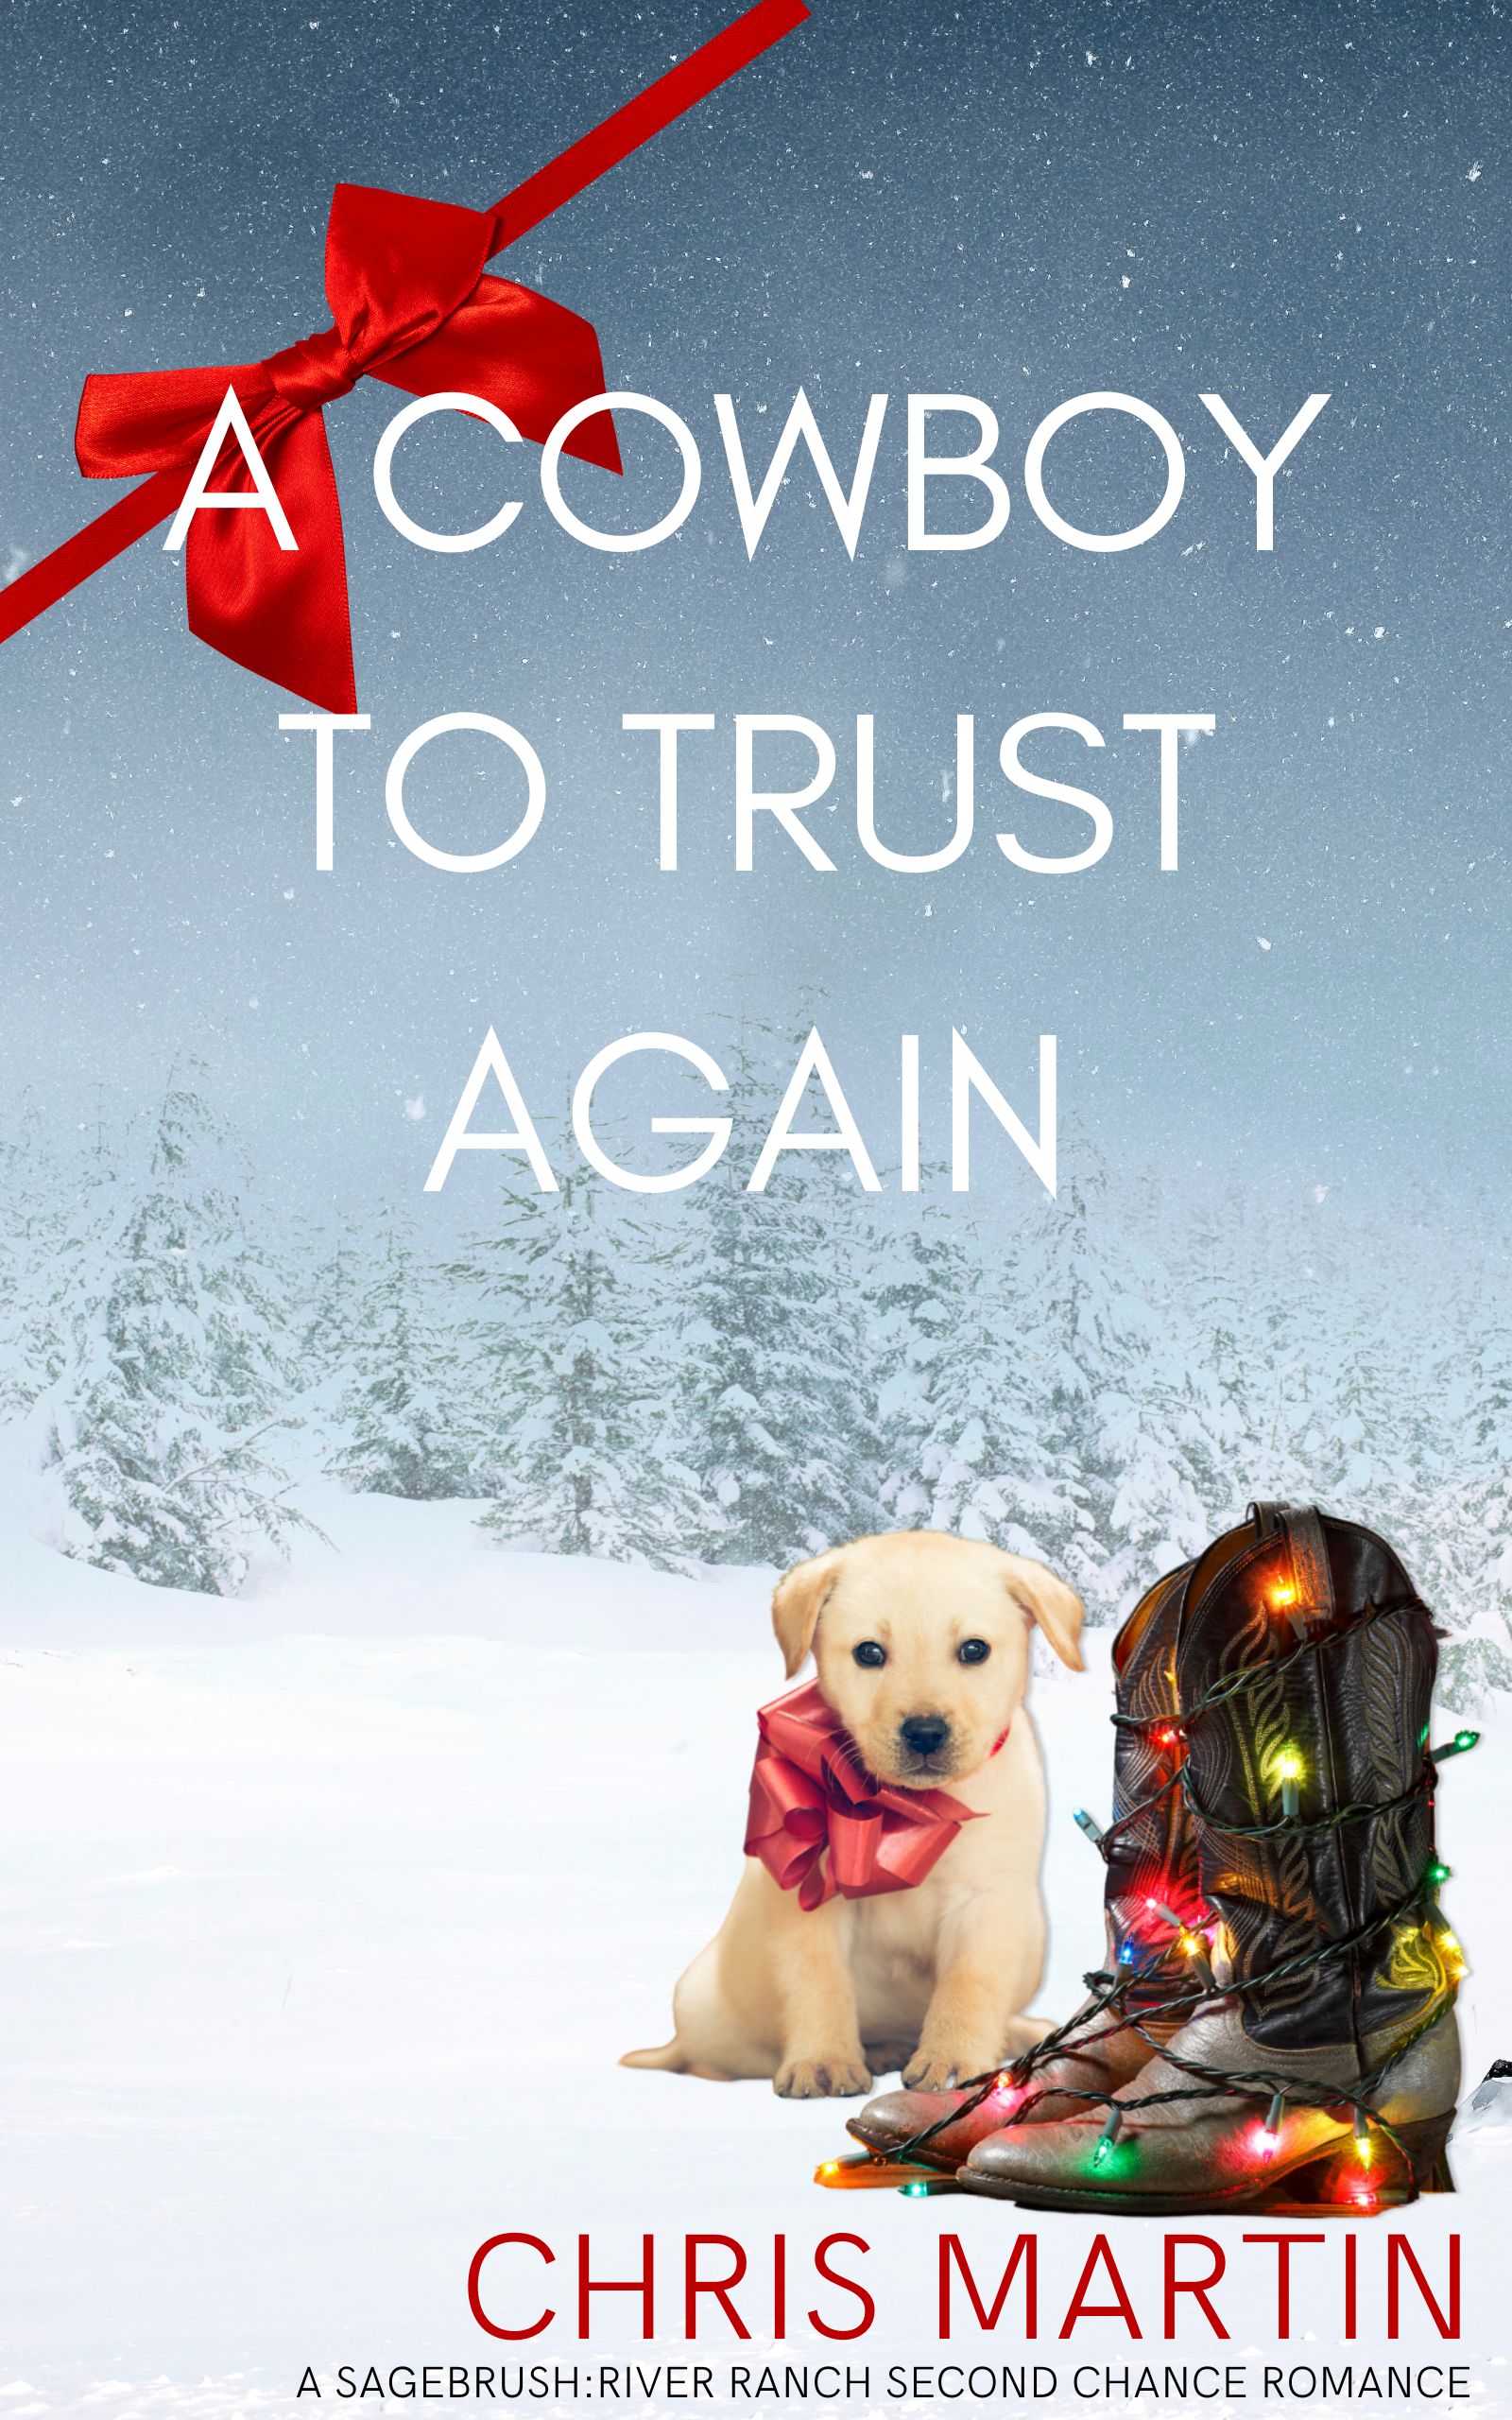 A Cowboy to Trust Again by Chris Martin, small dog and cowboy boots decorated with Christmas Lights sits amidst a snowy background